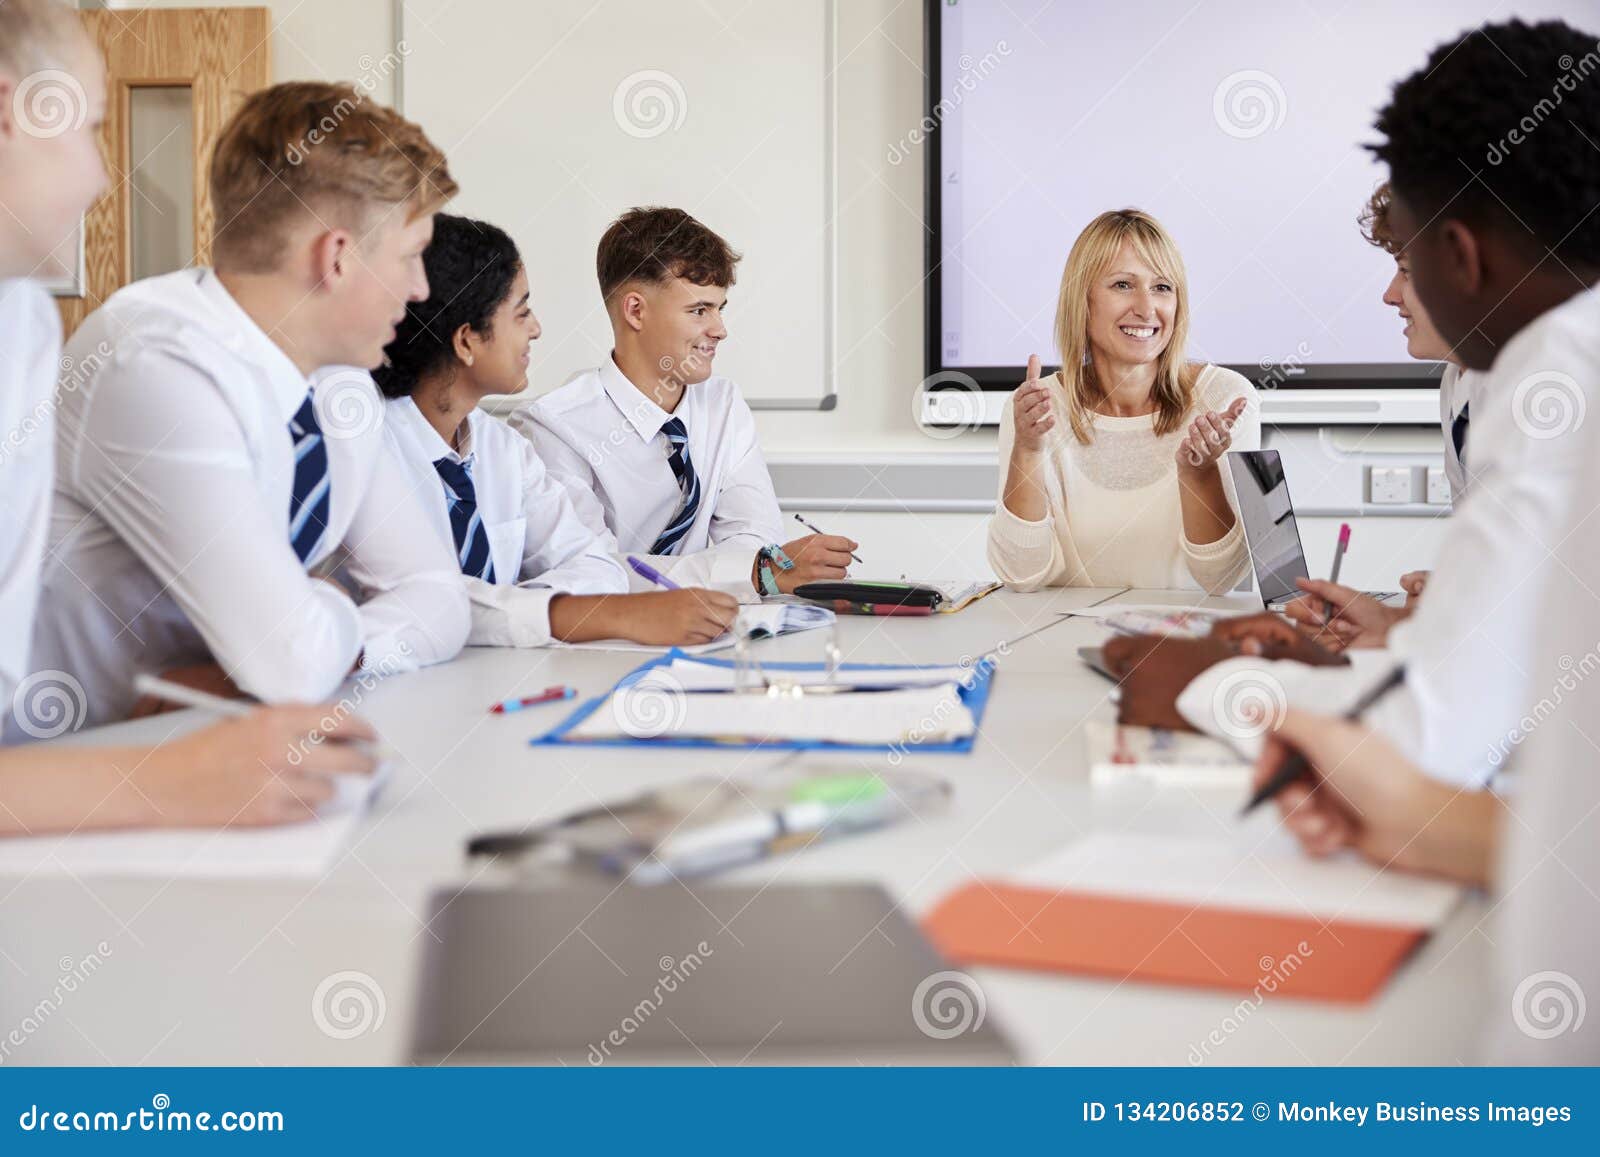 female high school teacher sitting at table with teenage pupils wearing uniform teaching lesson